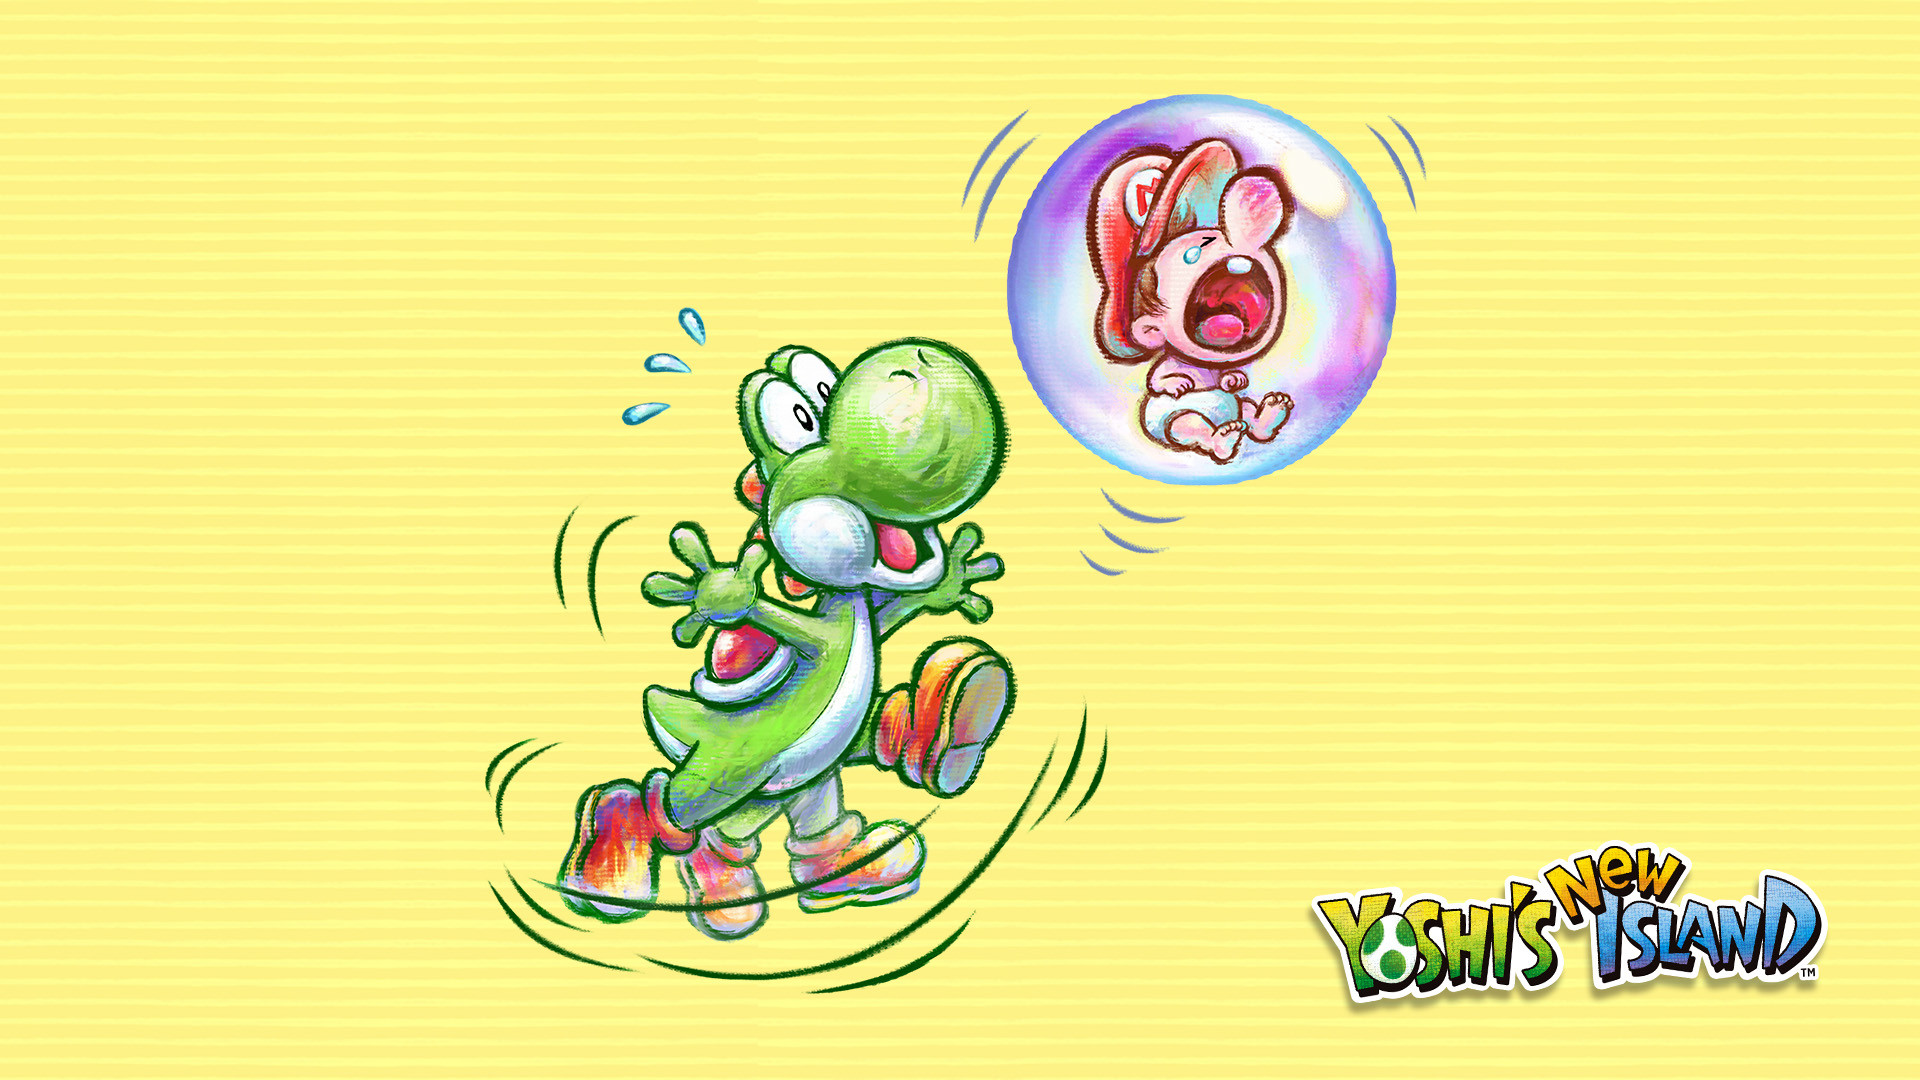 1920x1080 Yoshi images Yoshi's New Island - 1920 x 1080 Wallpaper HD wallpaper and  background photos